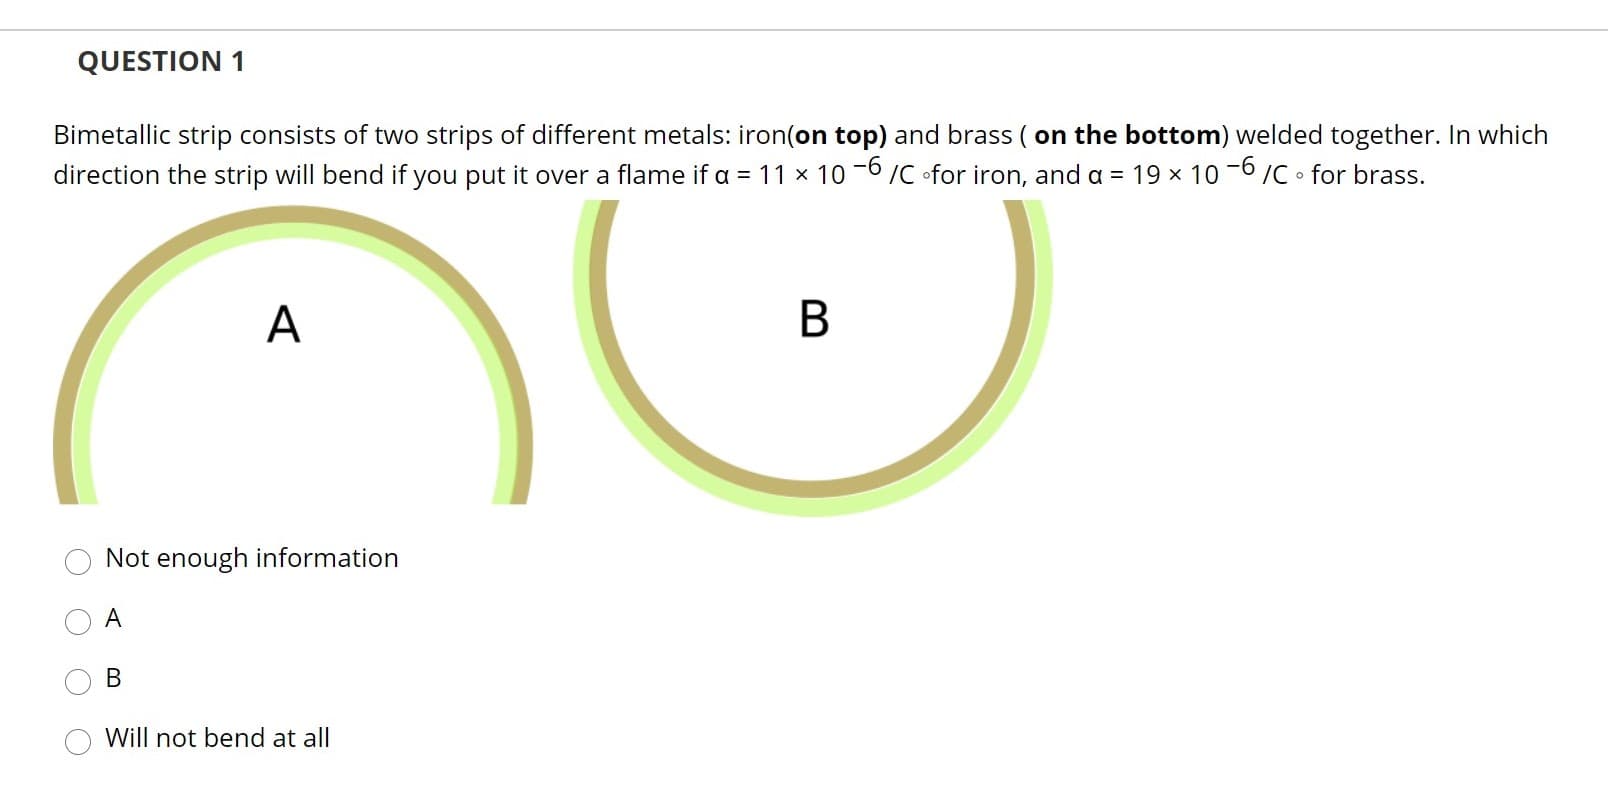 QUESTION 1
Bimetallic strip consists of two strips of different metals: iron(on top) and brass ( on the bottom) welded together. In which
direction the strip will bend if you put it over a flame if a = 11 x 10 -6 /C ofor iron, and a = 19 x 10 -6 /C • for brass.
А
Not enough information
A
В
Will not bend at all
